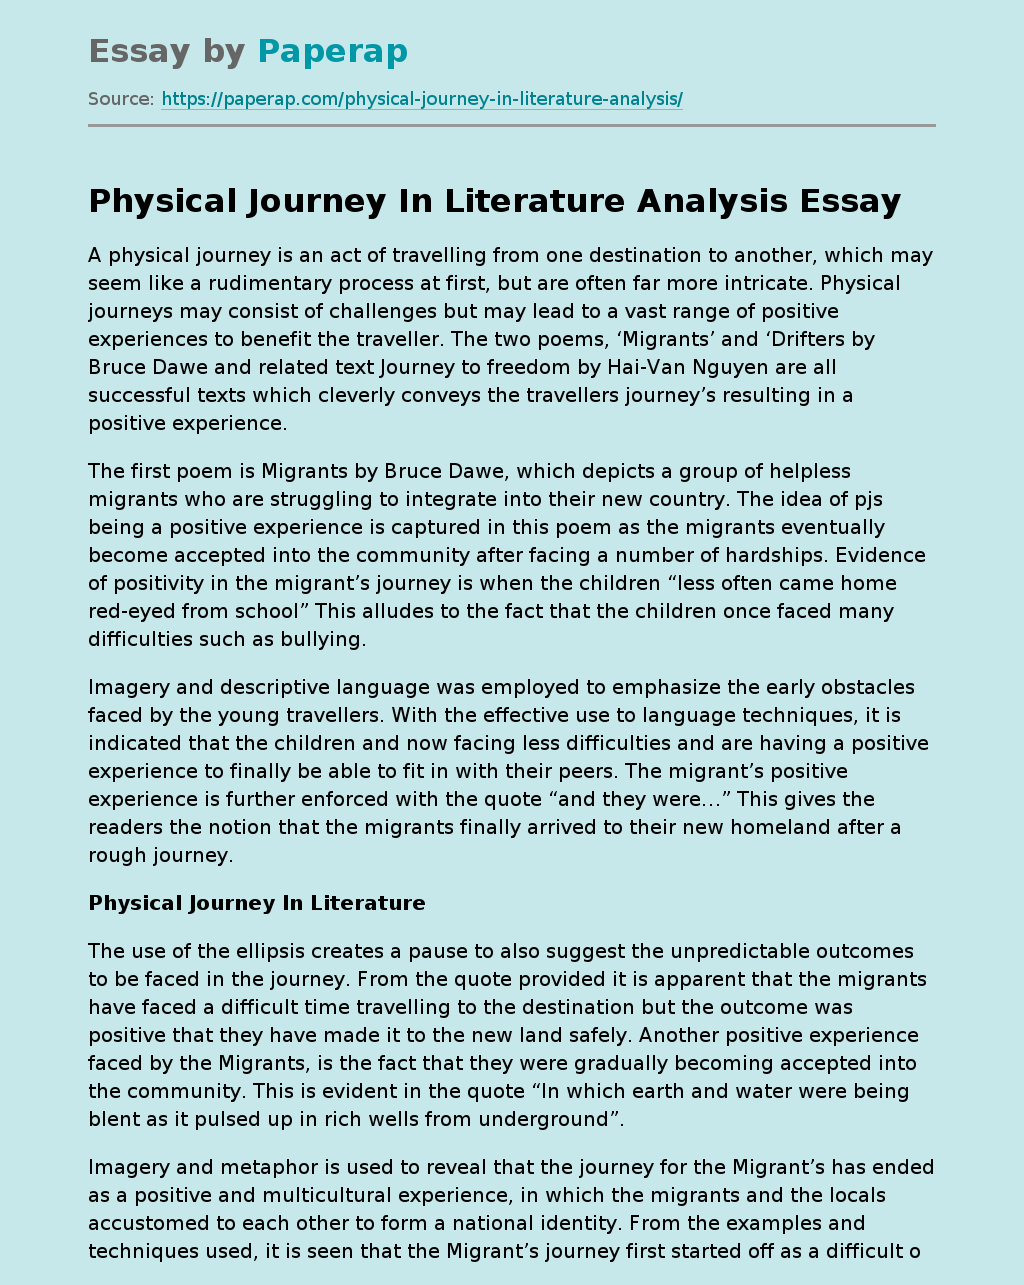 Physical Journey In Literature Analysis